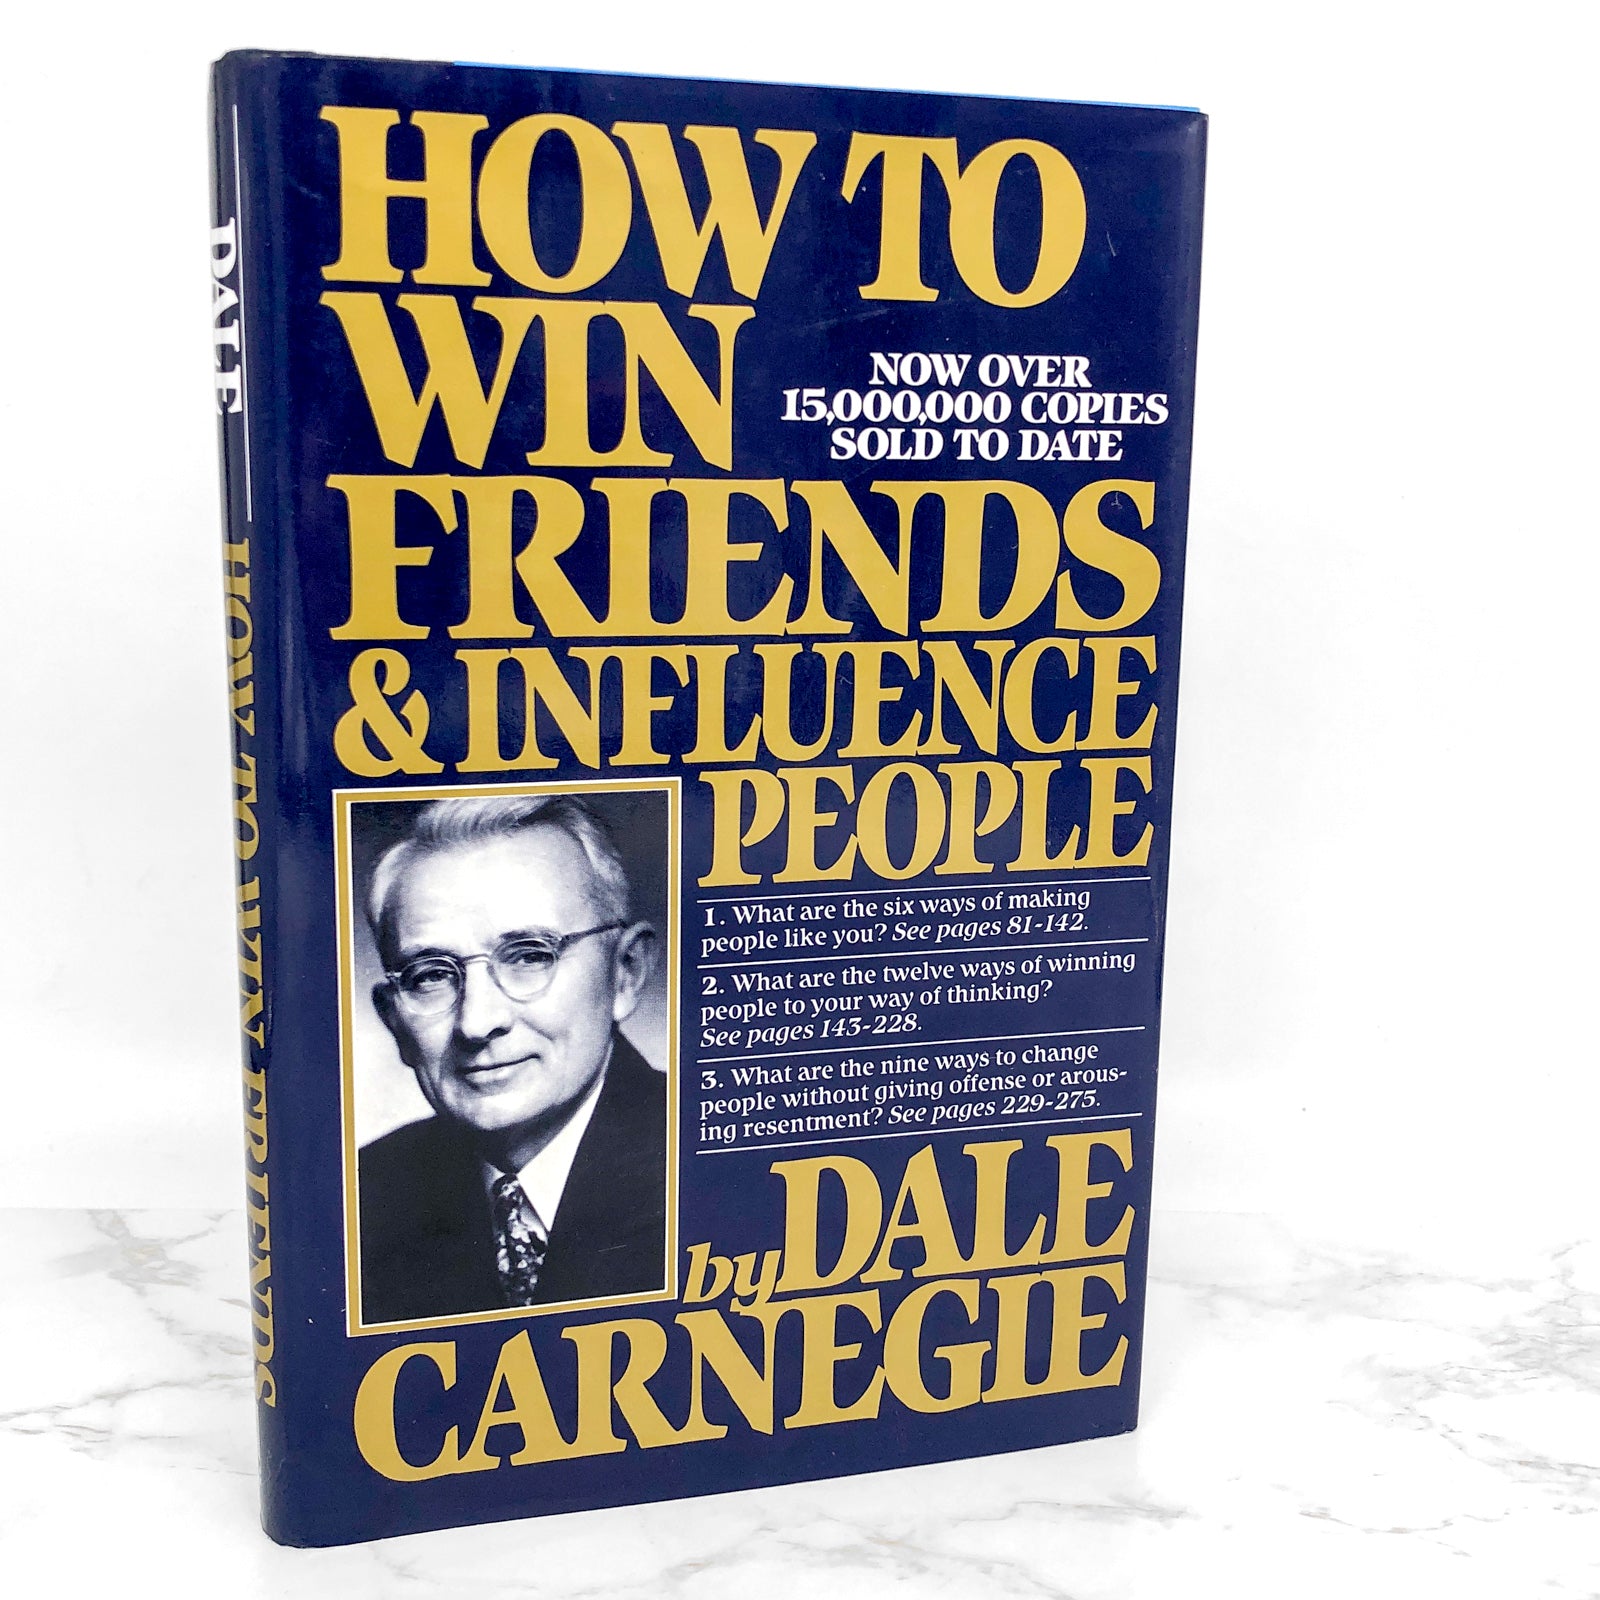 How to win Friends and Influence People by Dale Carnegie